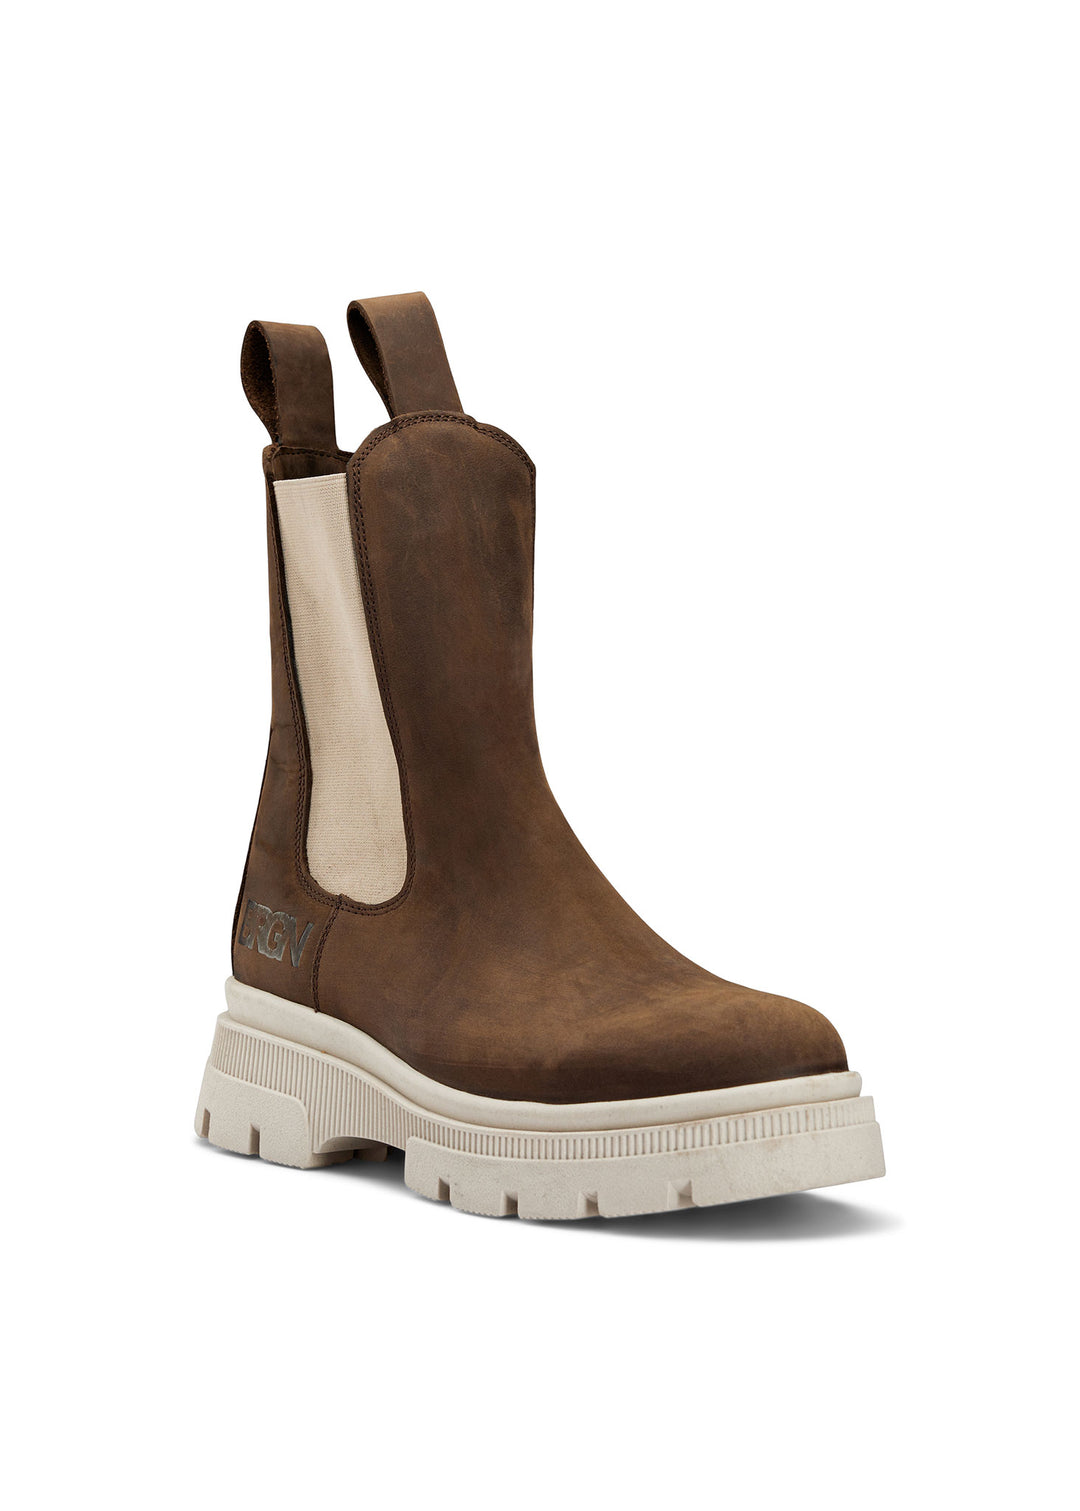 BRGN Chelsea Boot Shoes 187 Chocolate Brown / 135 Sand